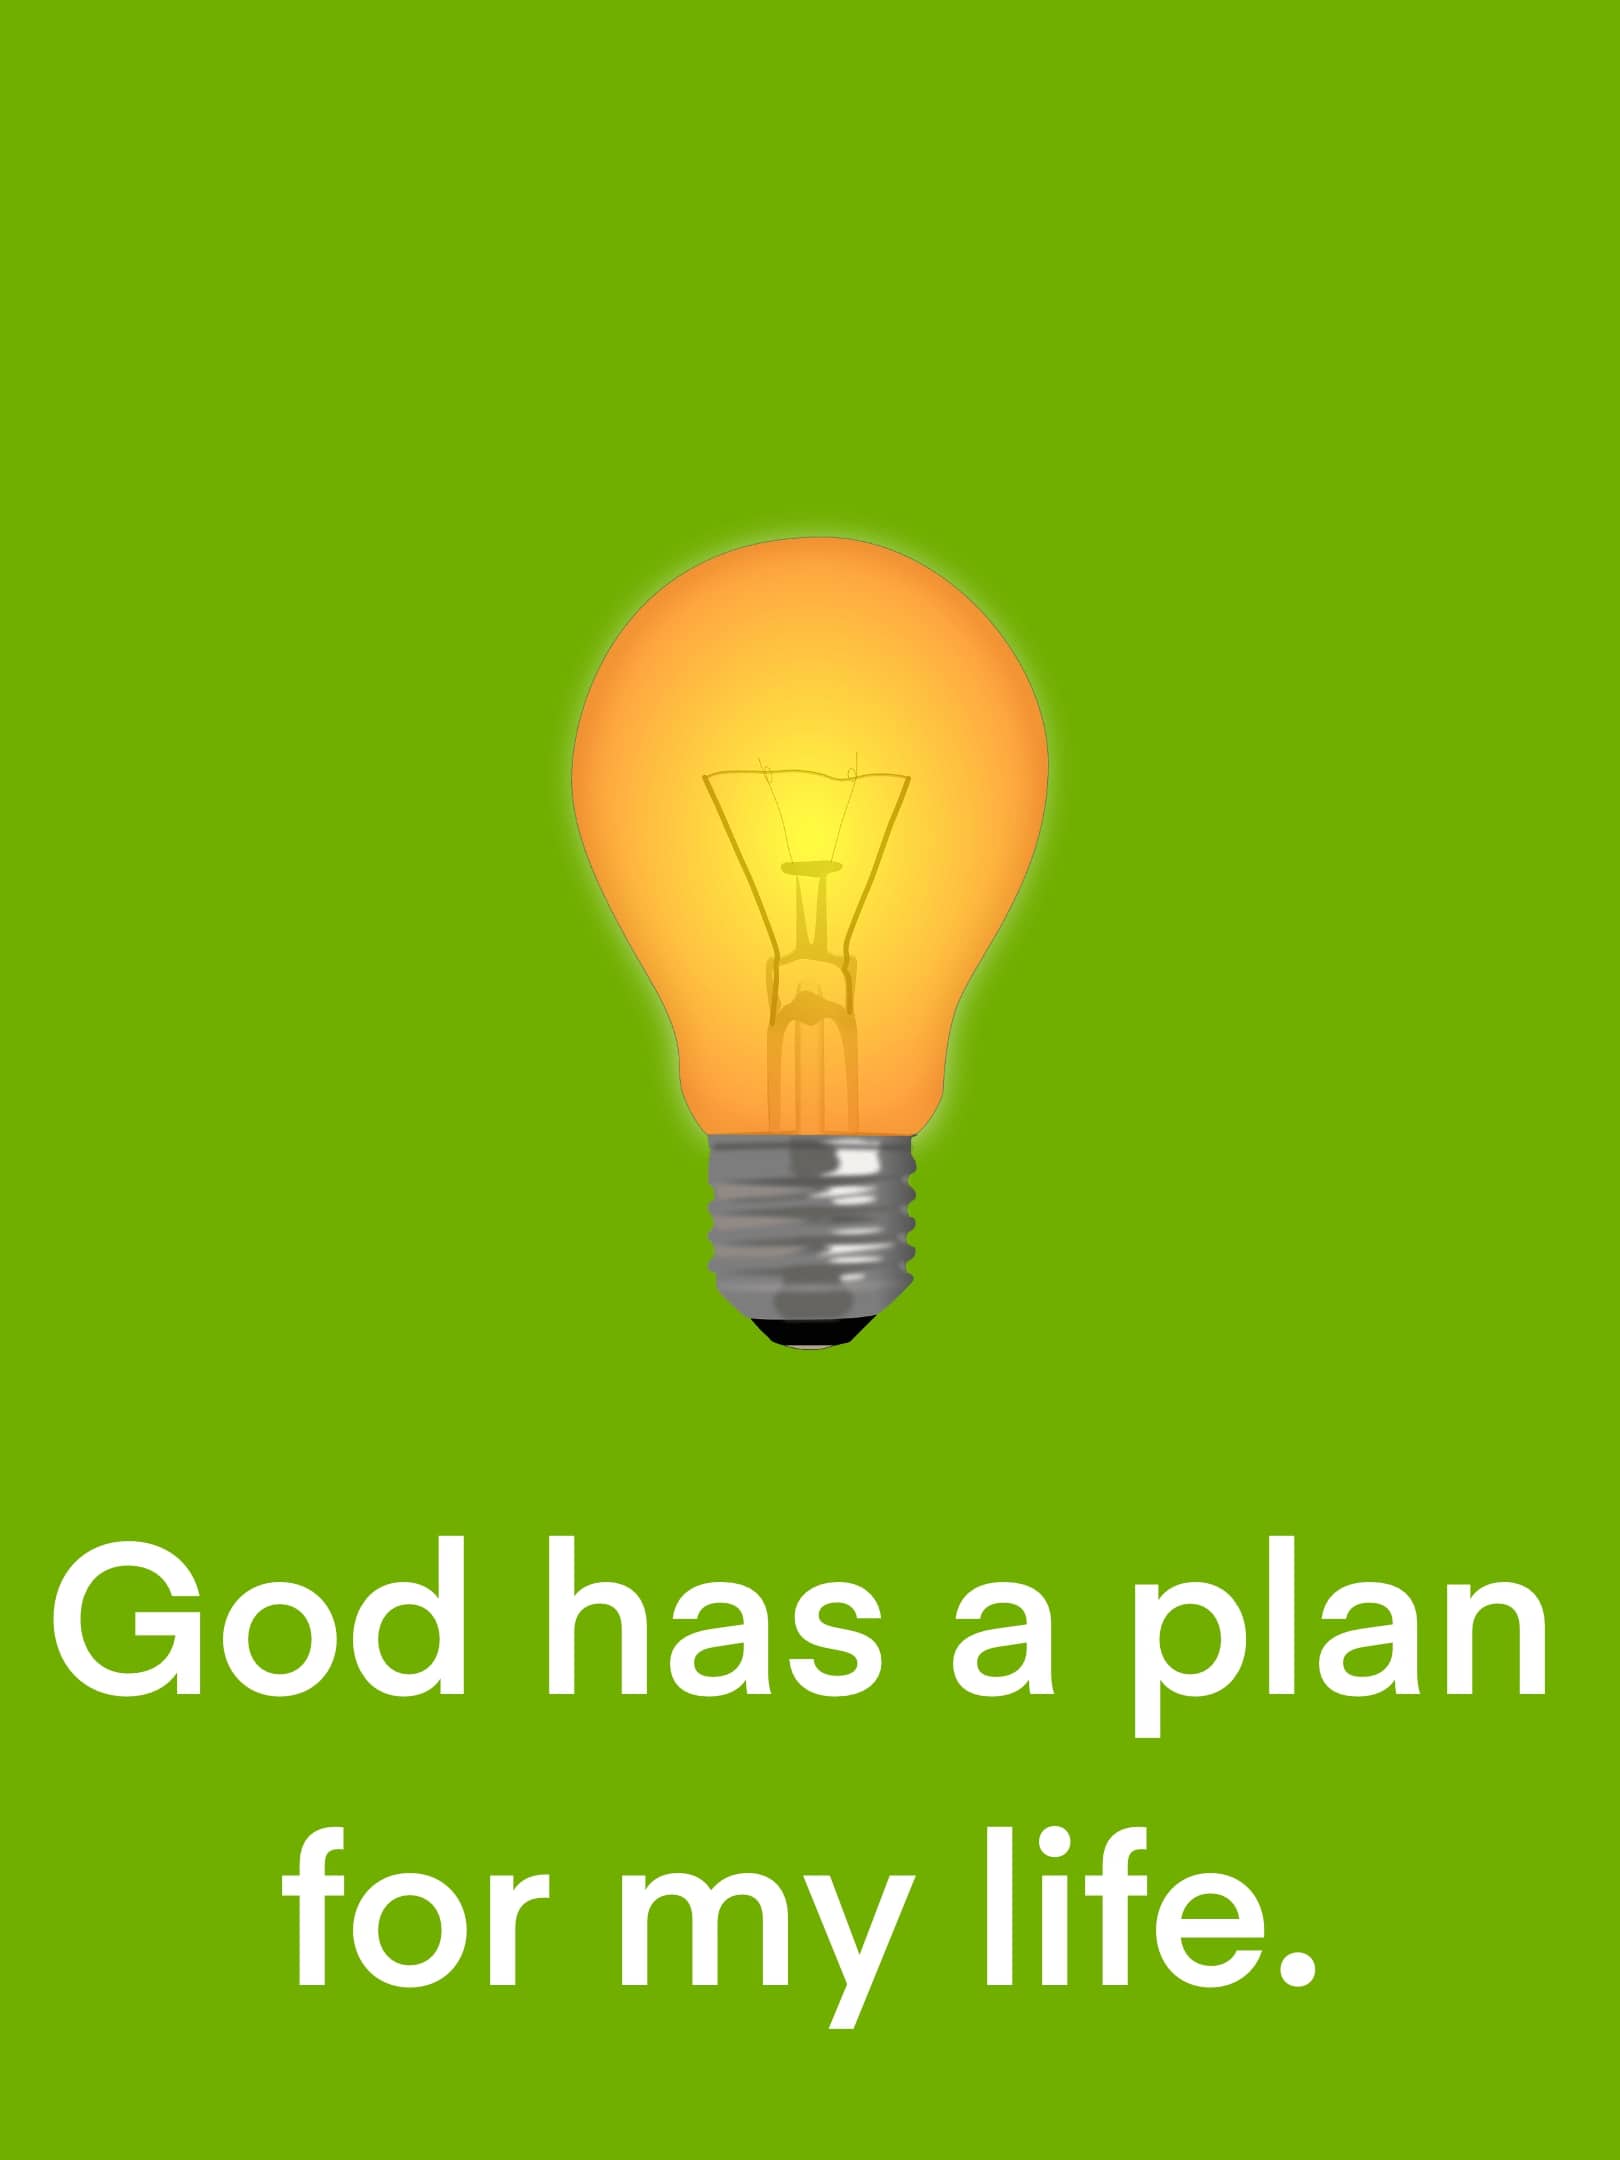 God has a plan for your life.